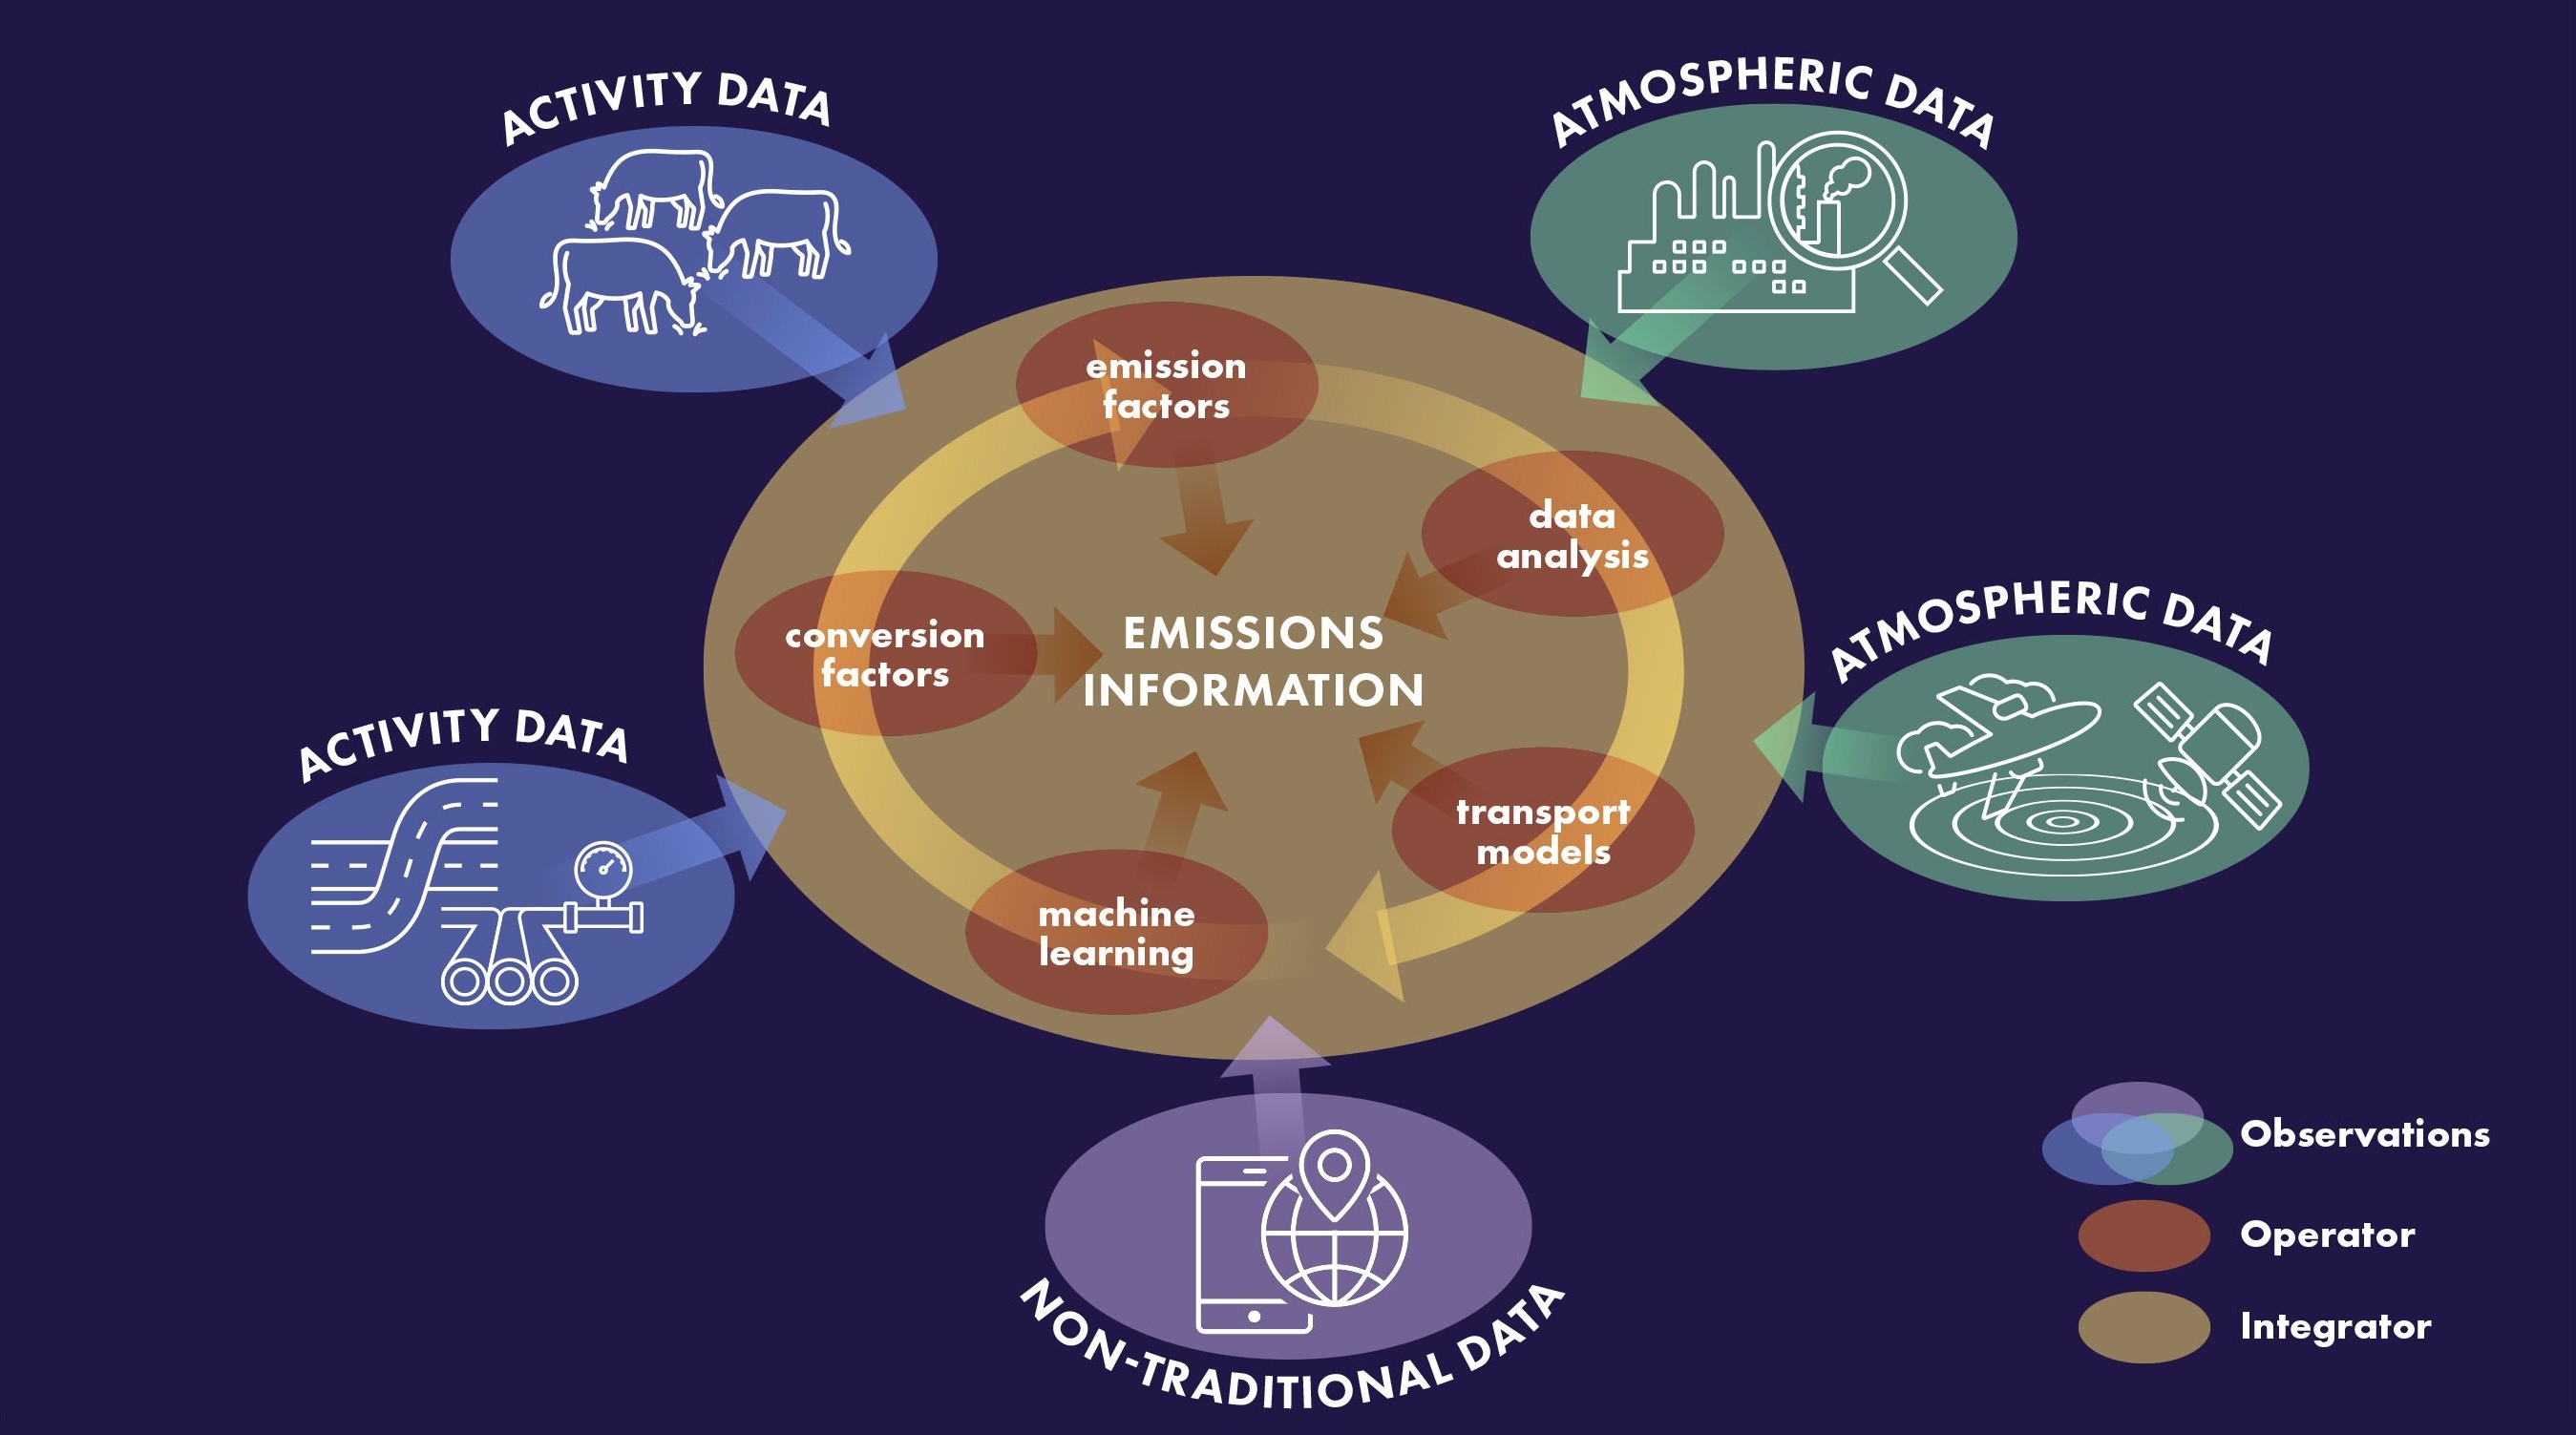 Hybrid approaches generate greenhouse gas (GHG) emissions information through the combination and more complete integration of activity data (blue), non-traditional data (purple), and atmospheric data (green) that is modified by operator(s) (red) and integrated (gold).